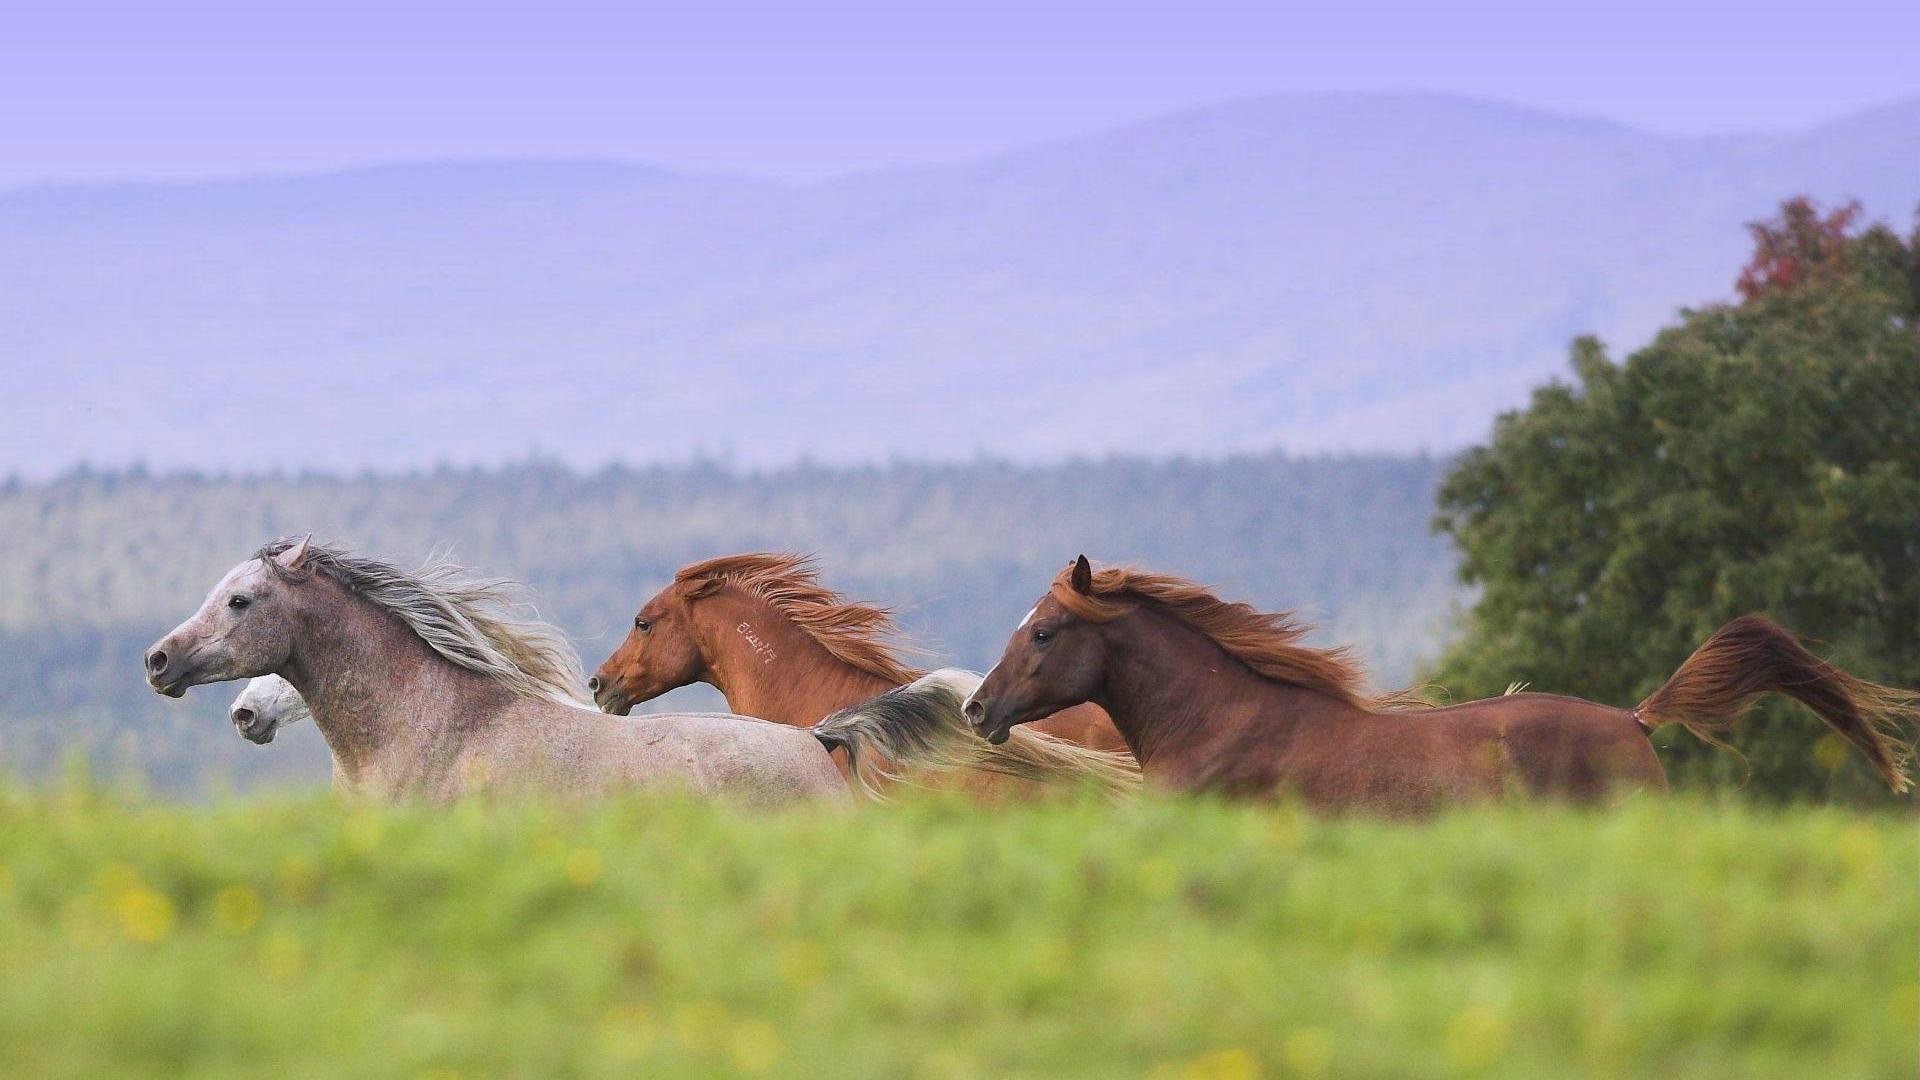 1920x1080 ... Images Wild Horses Wallpapers - Wallpaper Cave ...